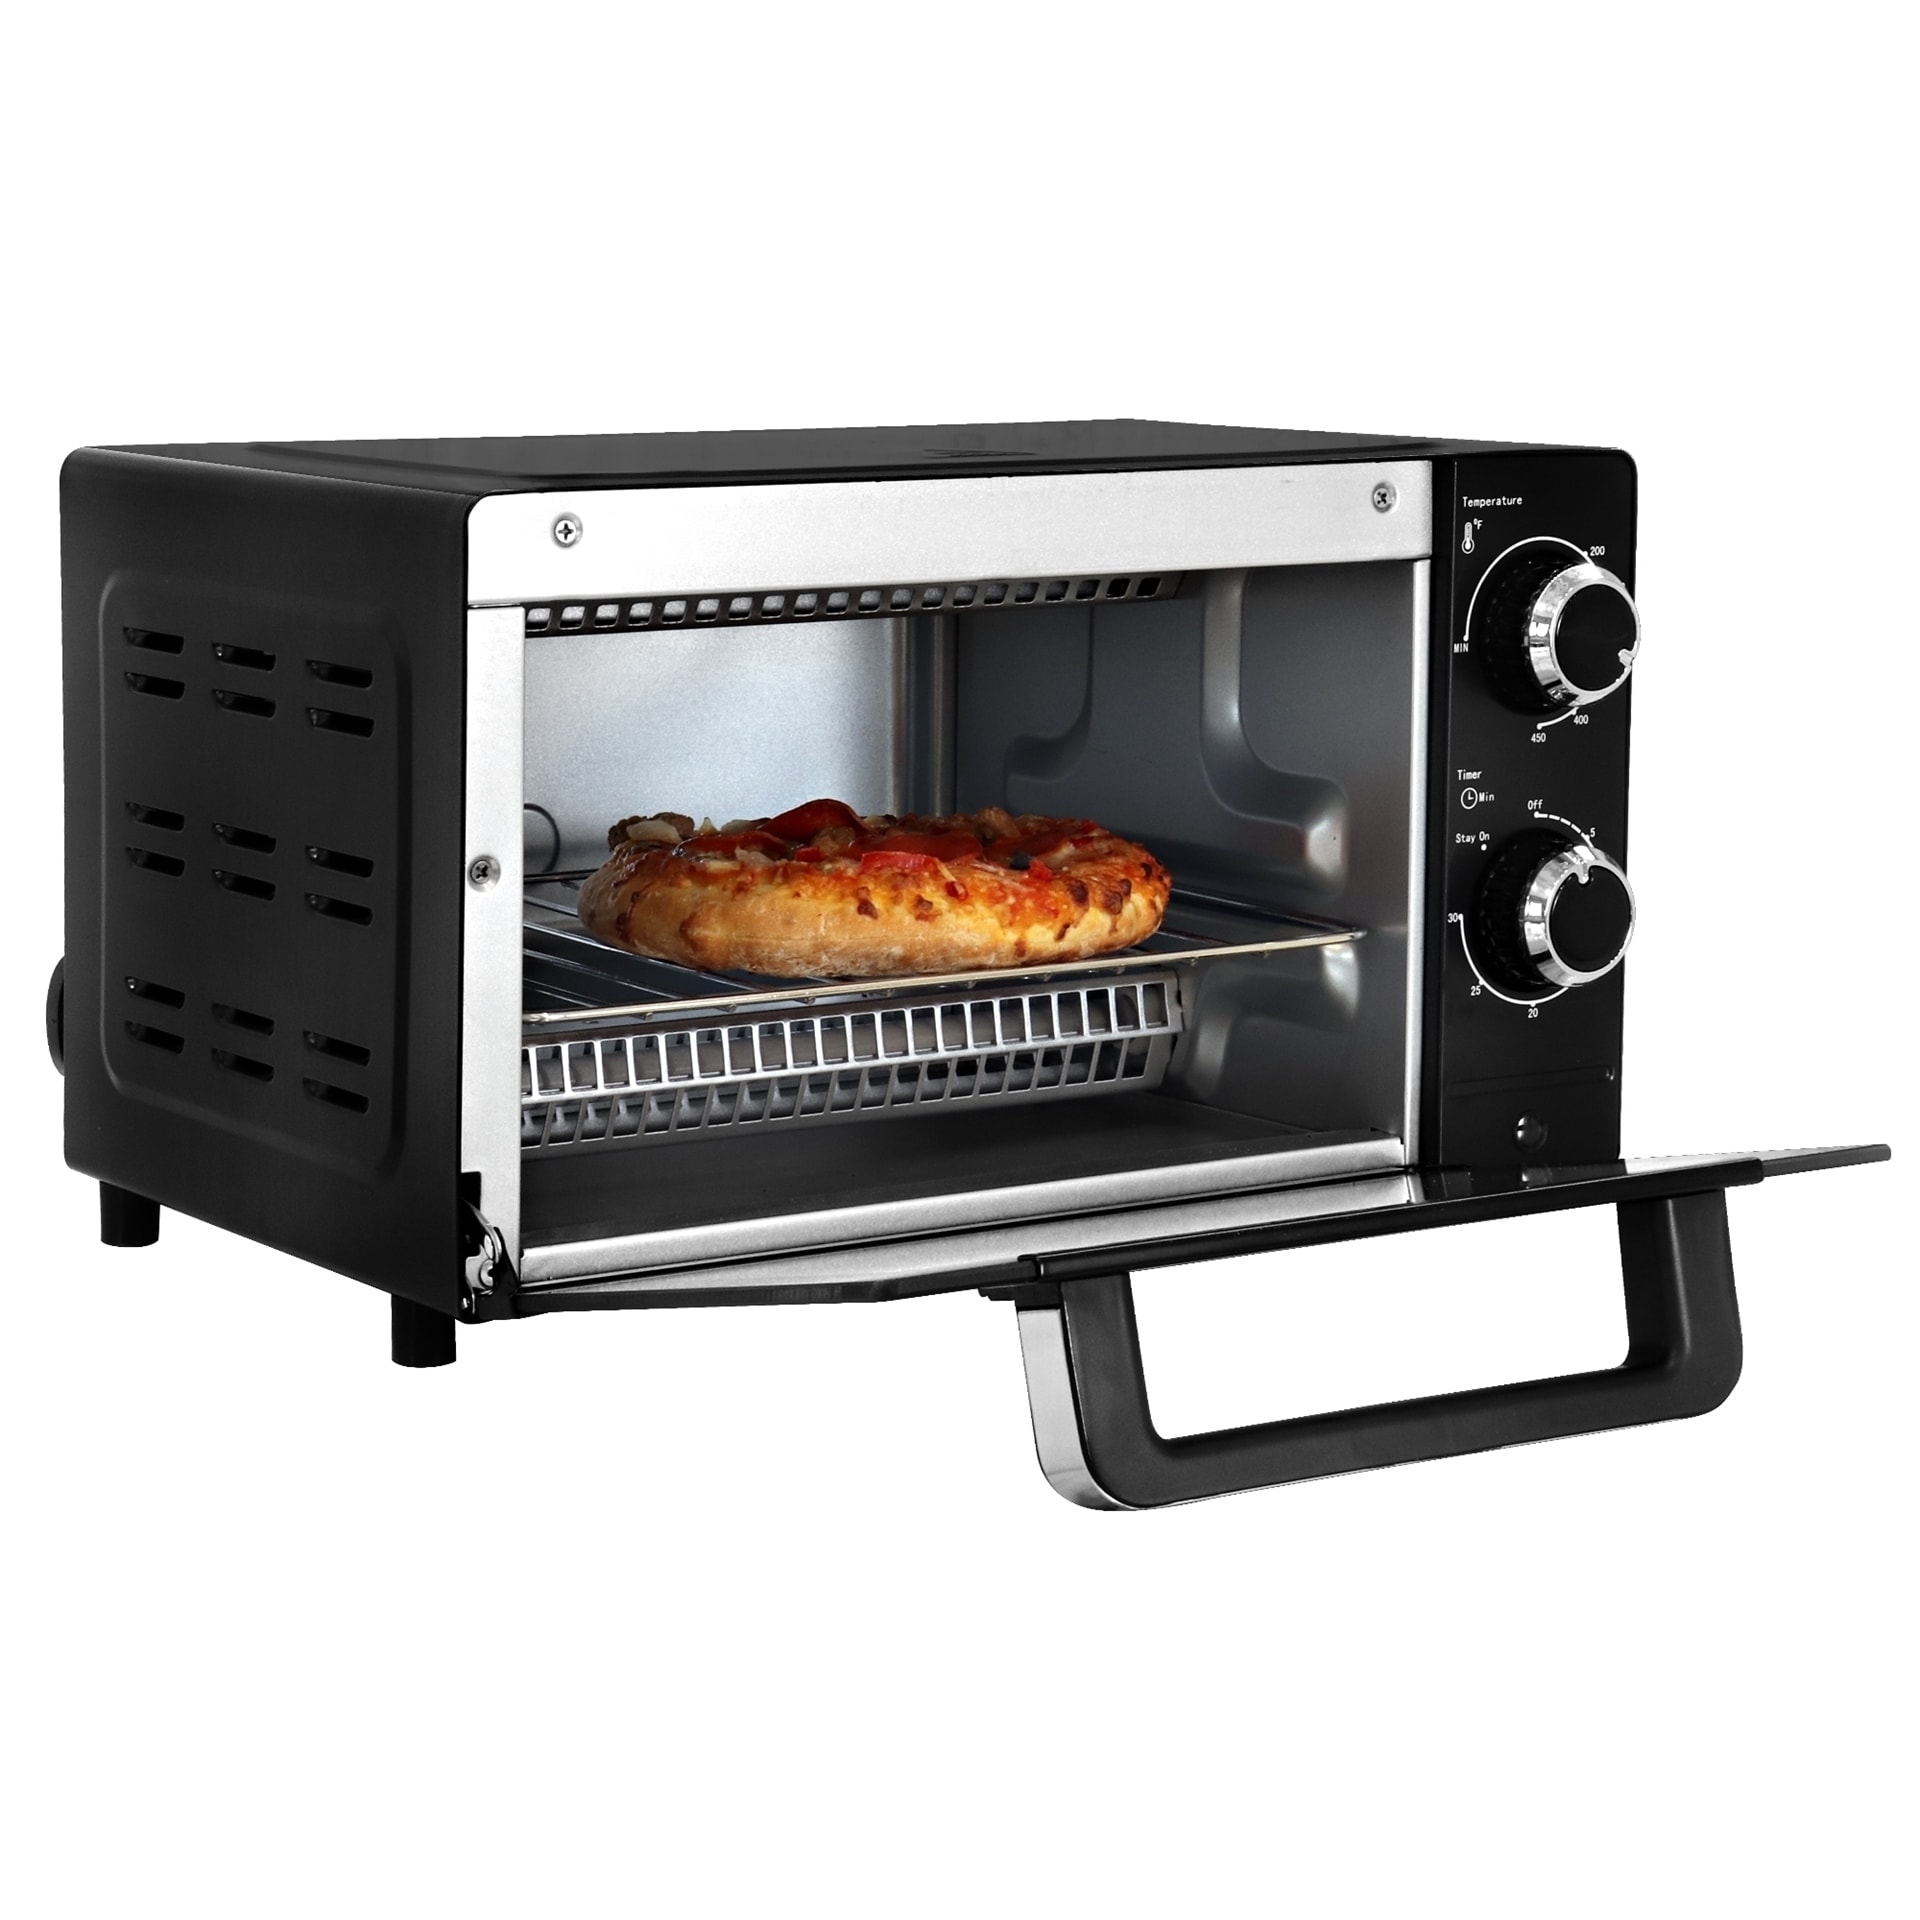 https://ak1.ostkcdn.com/images/products/is/images/direct/489c35f869e329fc2594271b40fa0ad6fcbbd8cf/Total-Chef-4-Slice-Toaster-Oven%2C-1000W%2C-Black-Compact-Countertop-Oven-with-Natural-Convection%2C-Temperature-Control-Dial.jpg